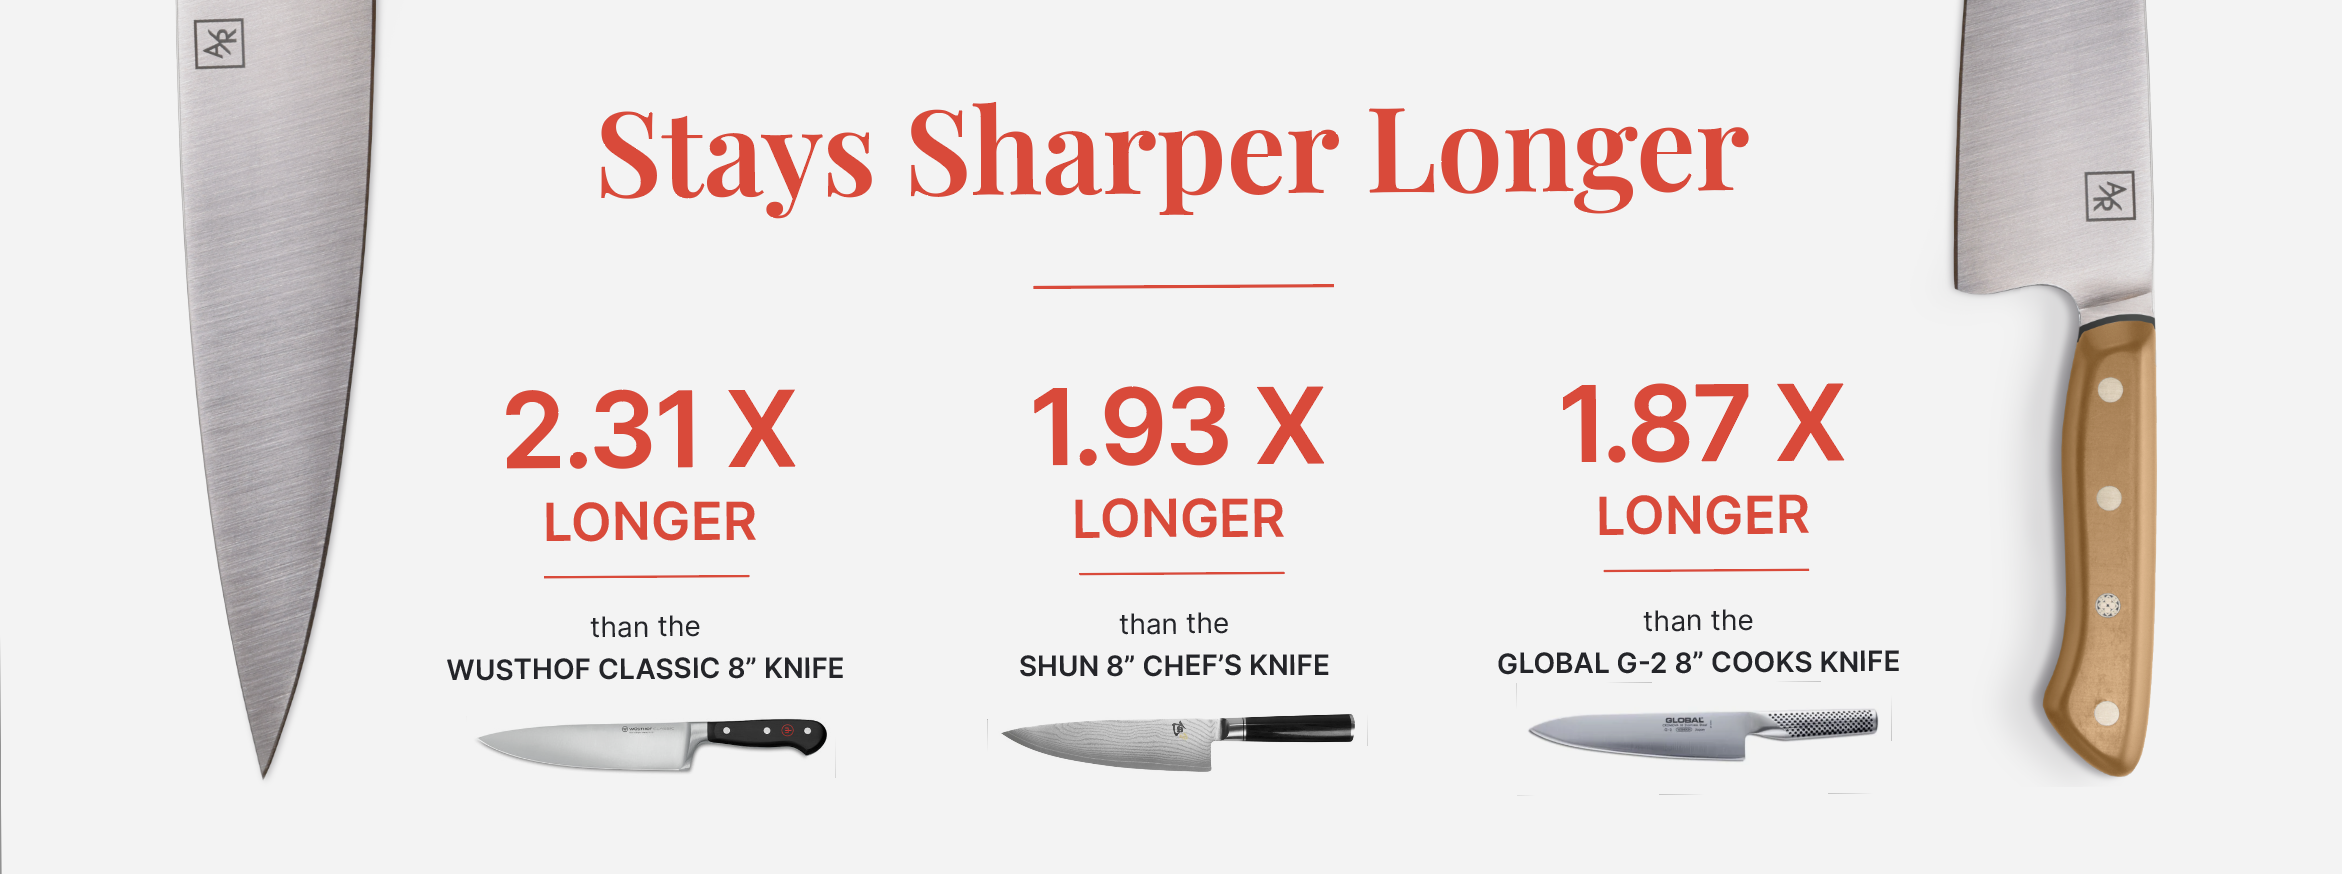 Here's How to Make Your Knife Last Forever on the Cheap